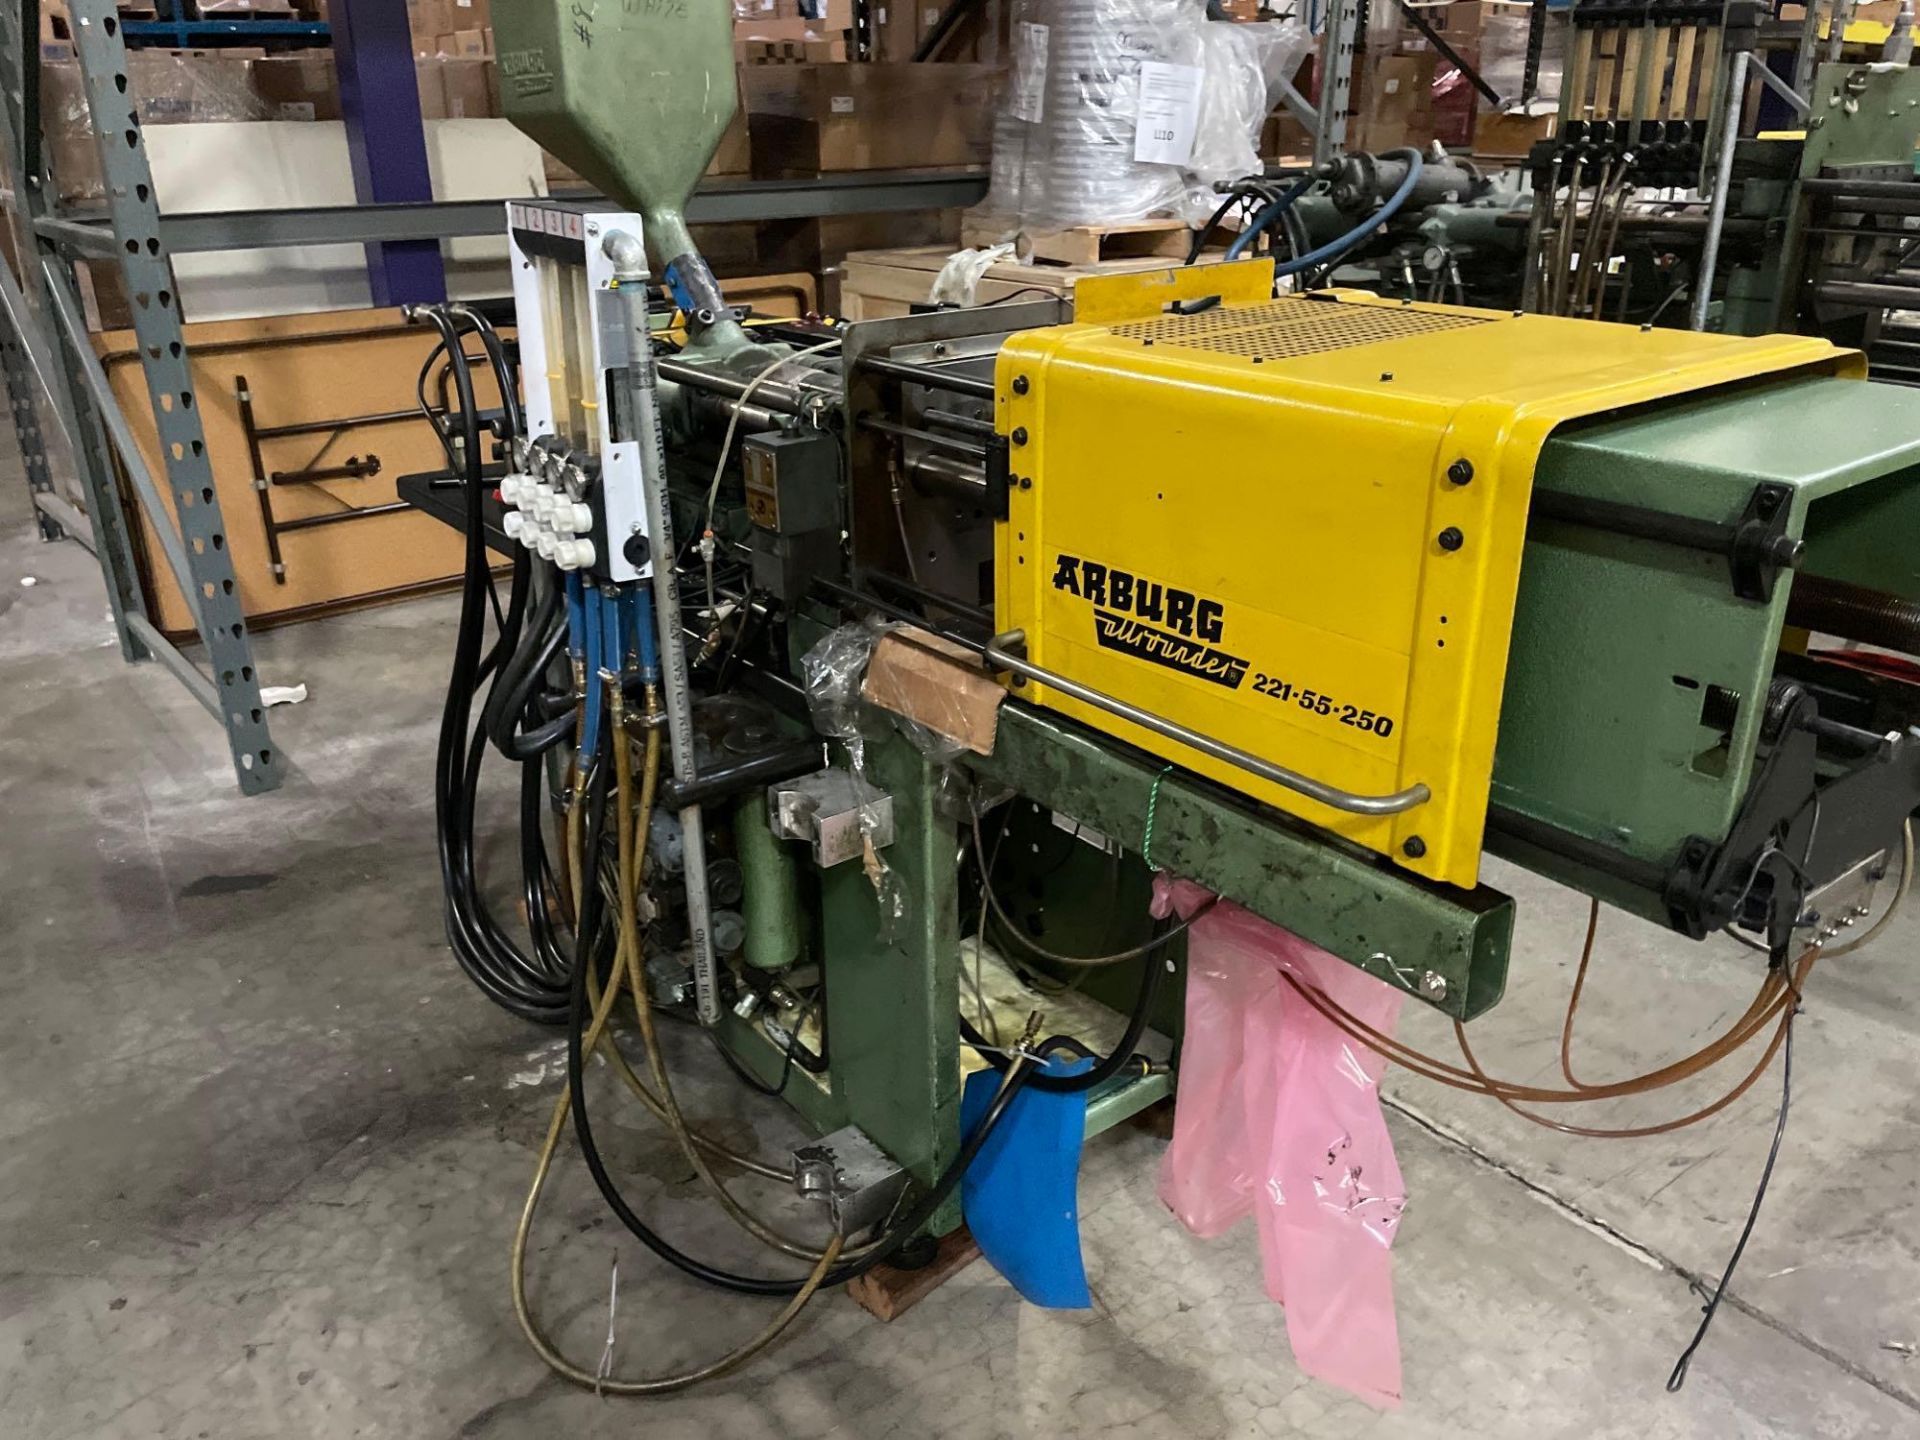 Arburg Allrounder 221-55-250 Plastic Injection Molding Machine *PARTS ONLY* - Image 4 of 5